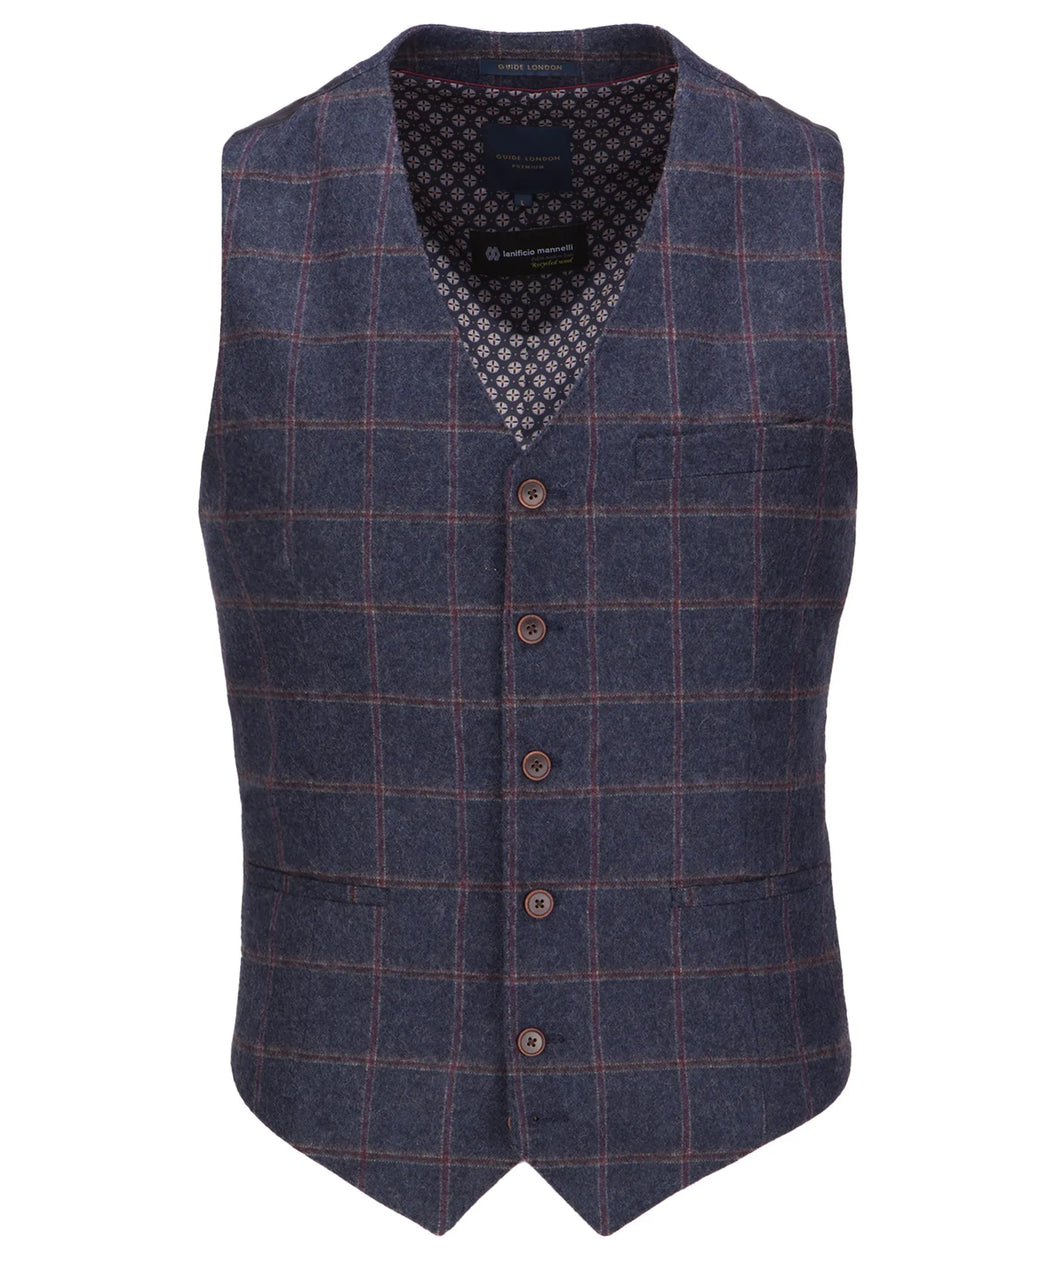 Guide London Brushed Tweed Check Waistcoat Blue